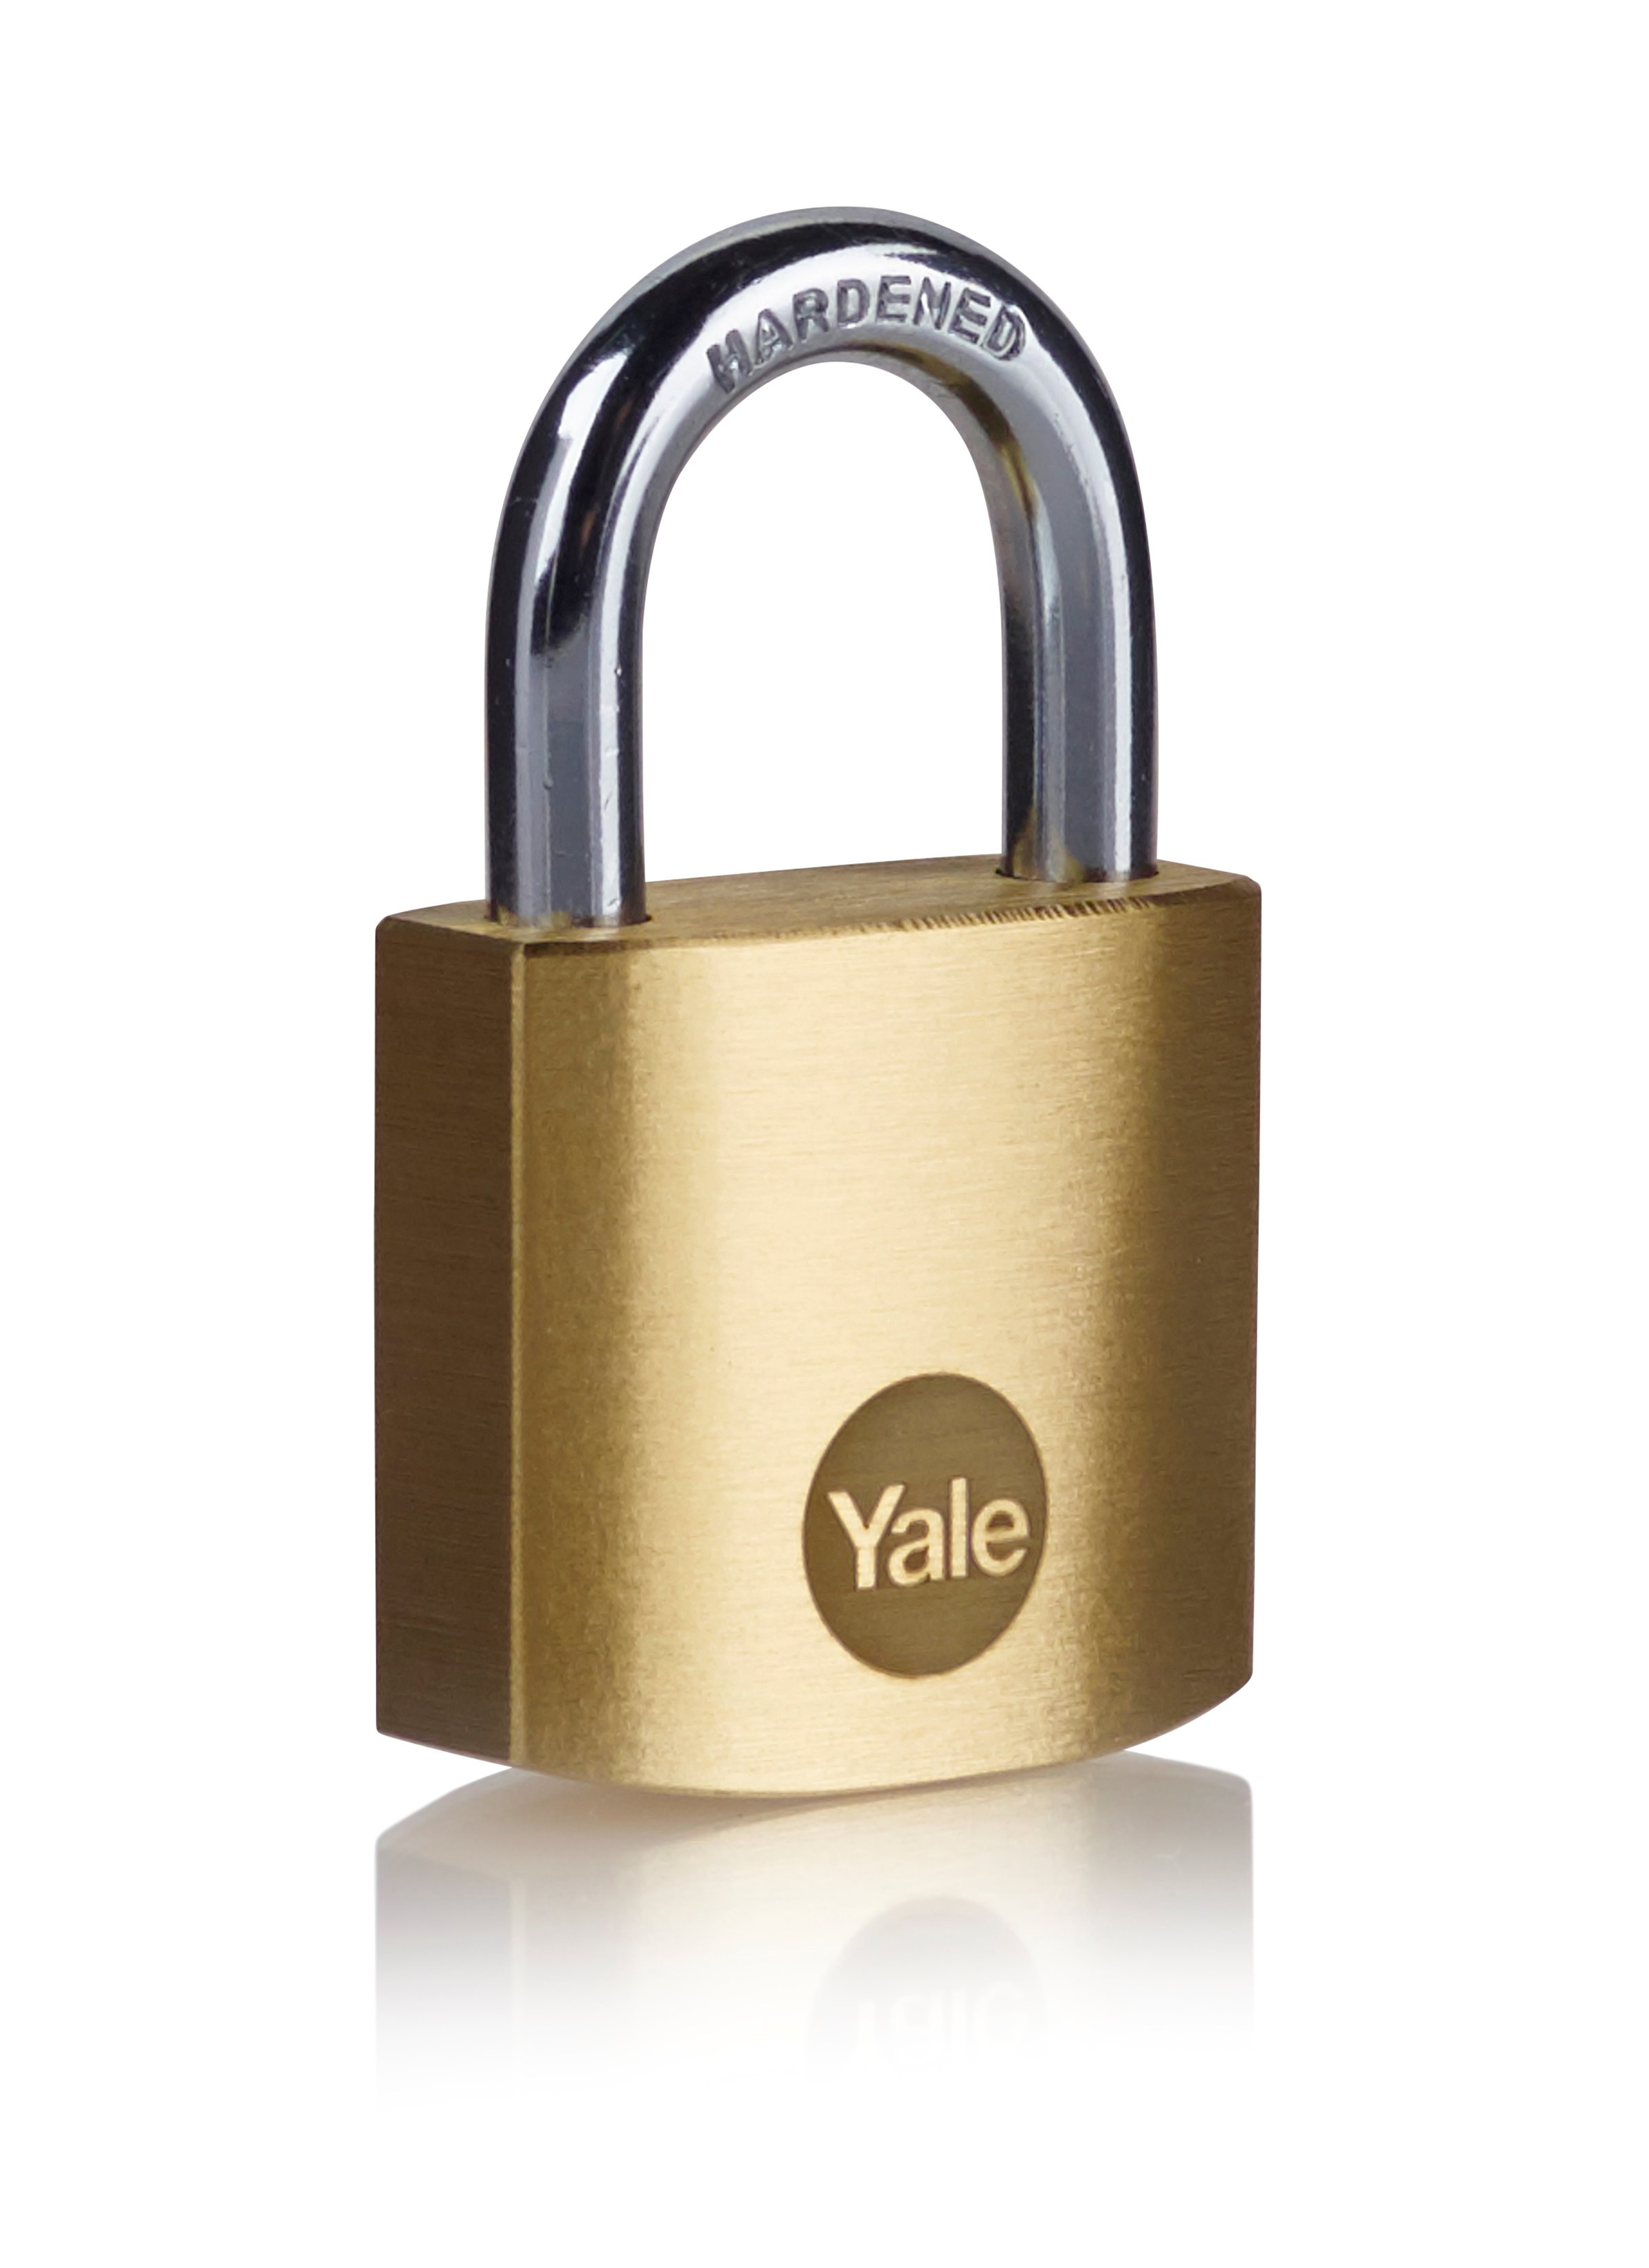 YALE PADLOCK 22mm Steel Shackle Brass Outdoor Gate Shed Strong Loop Latch Code 